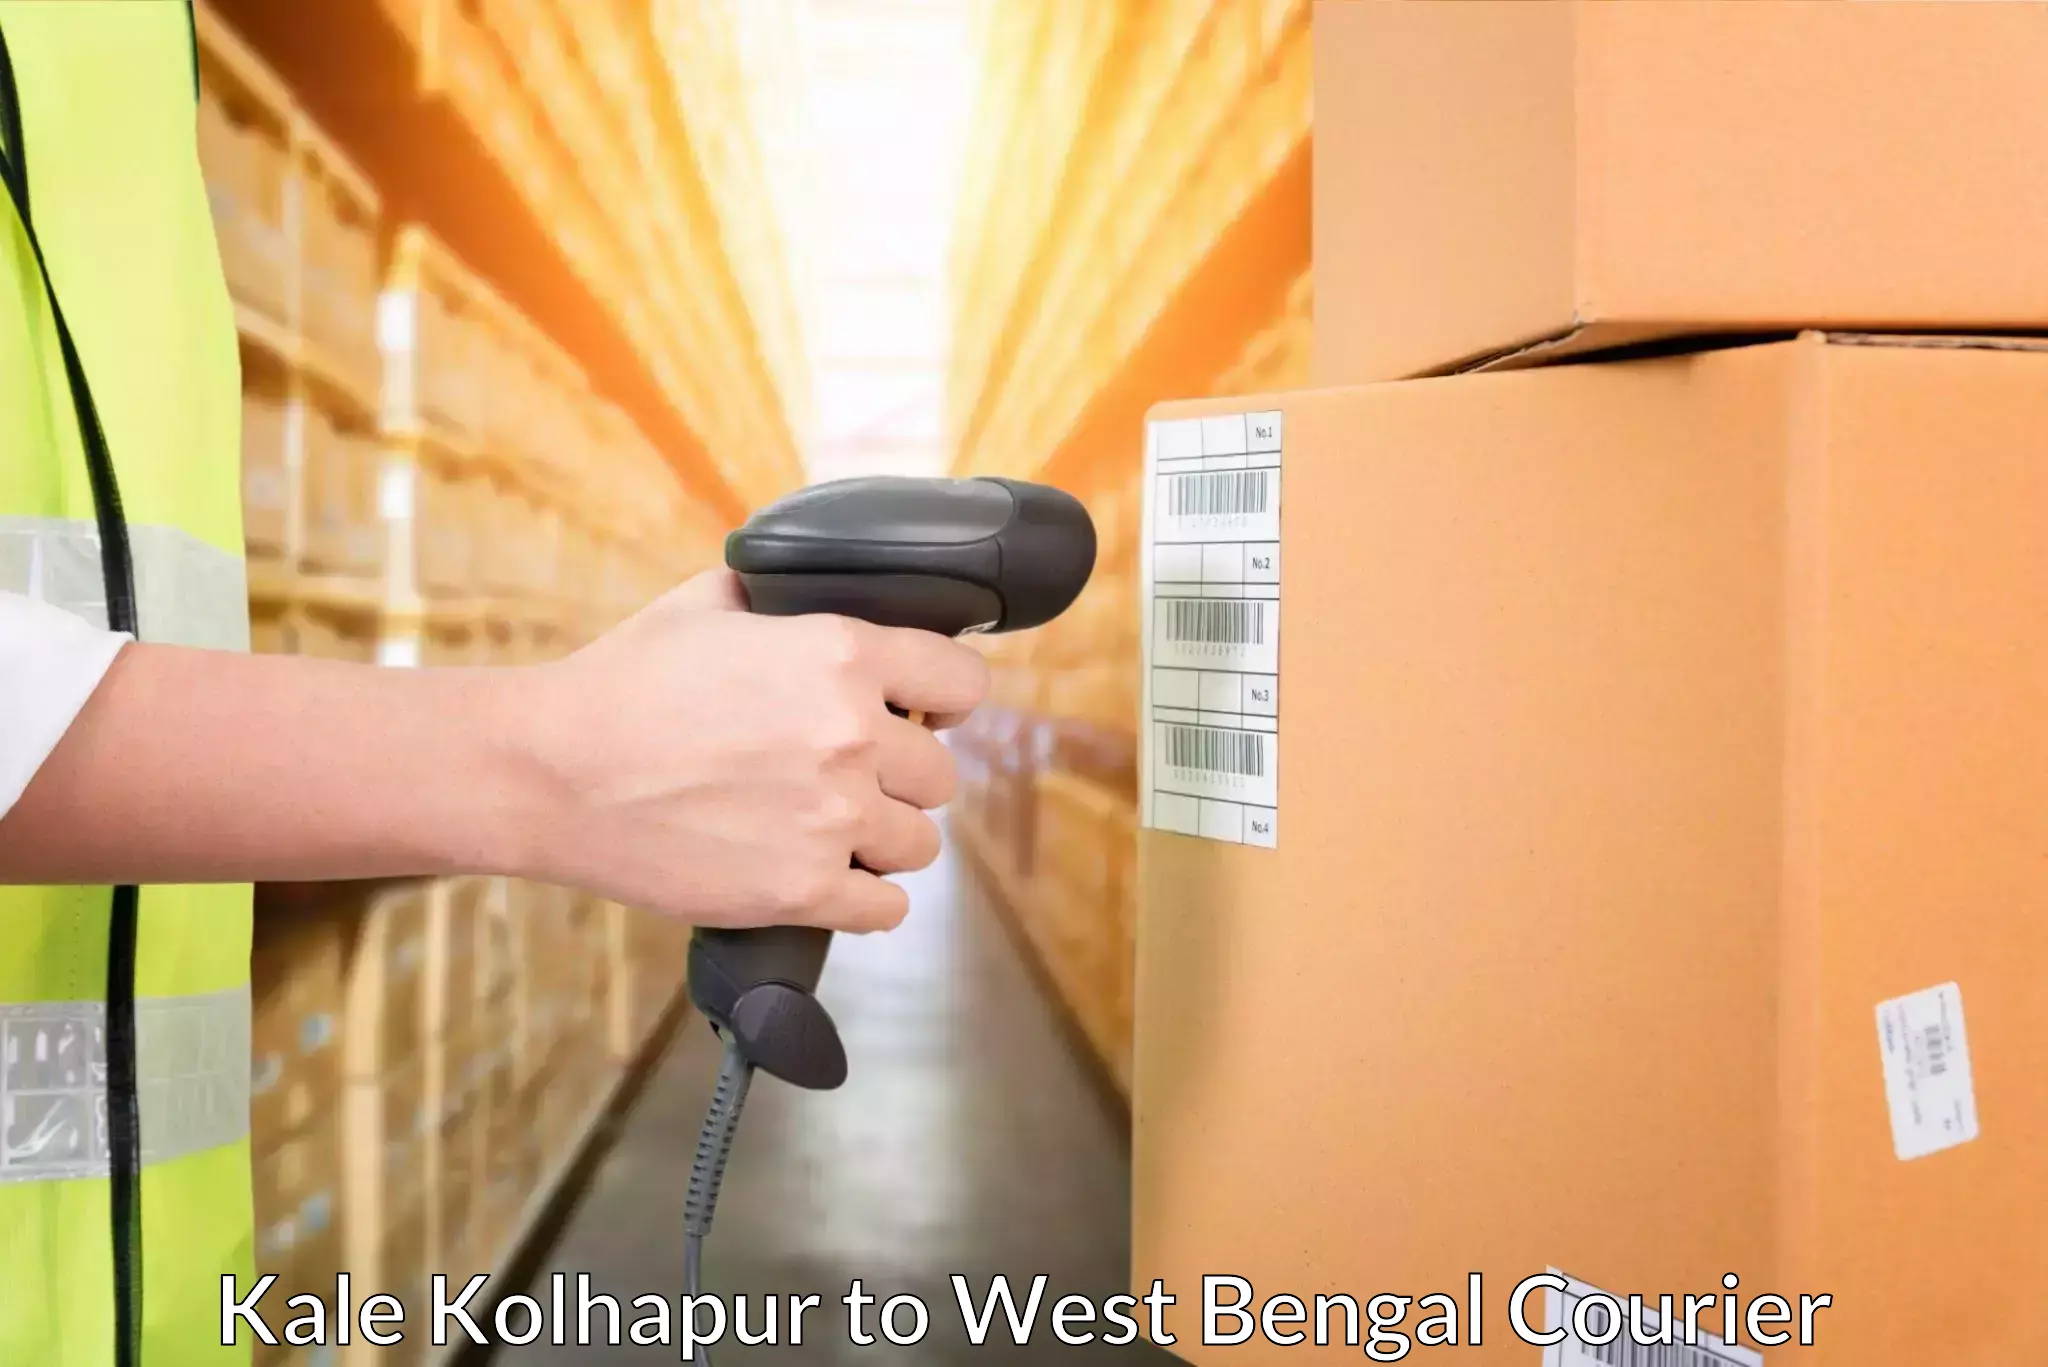 Advanced shipping technology Kale Kolhapur to West Bengal